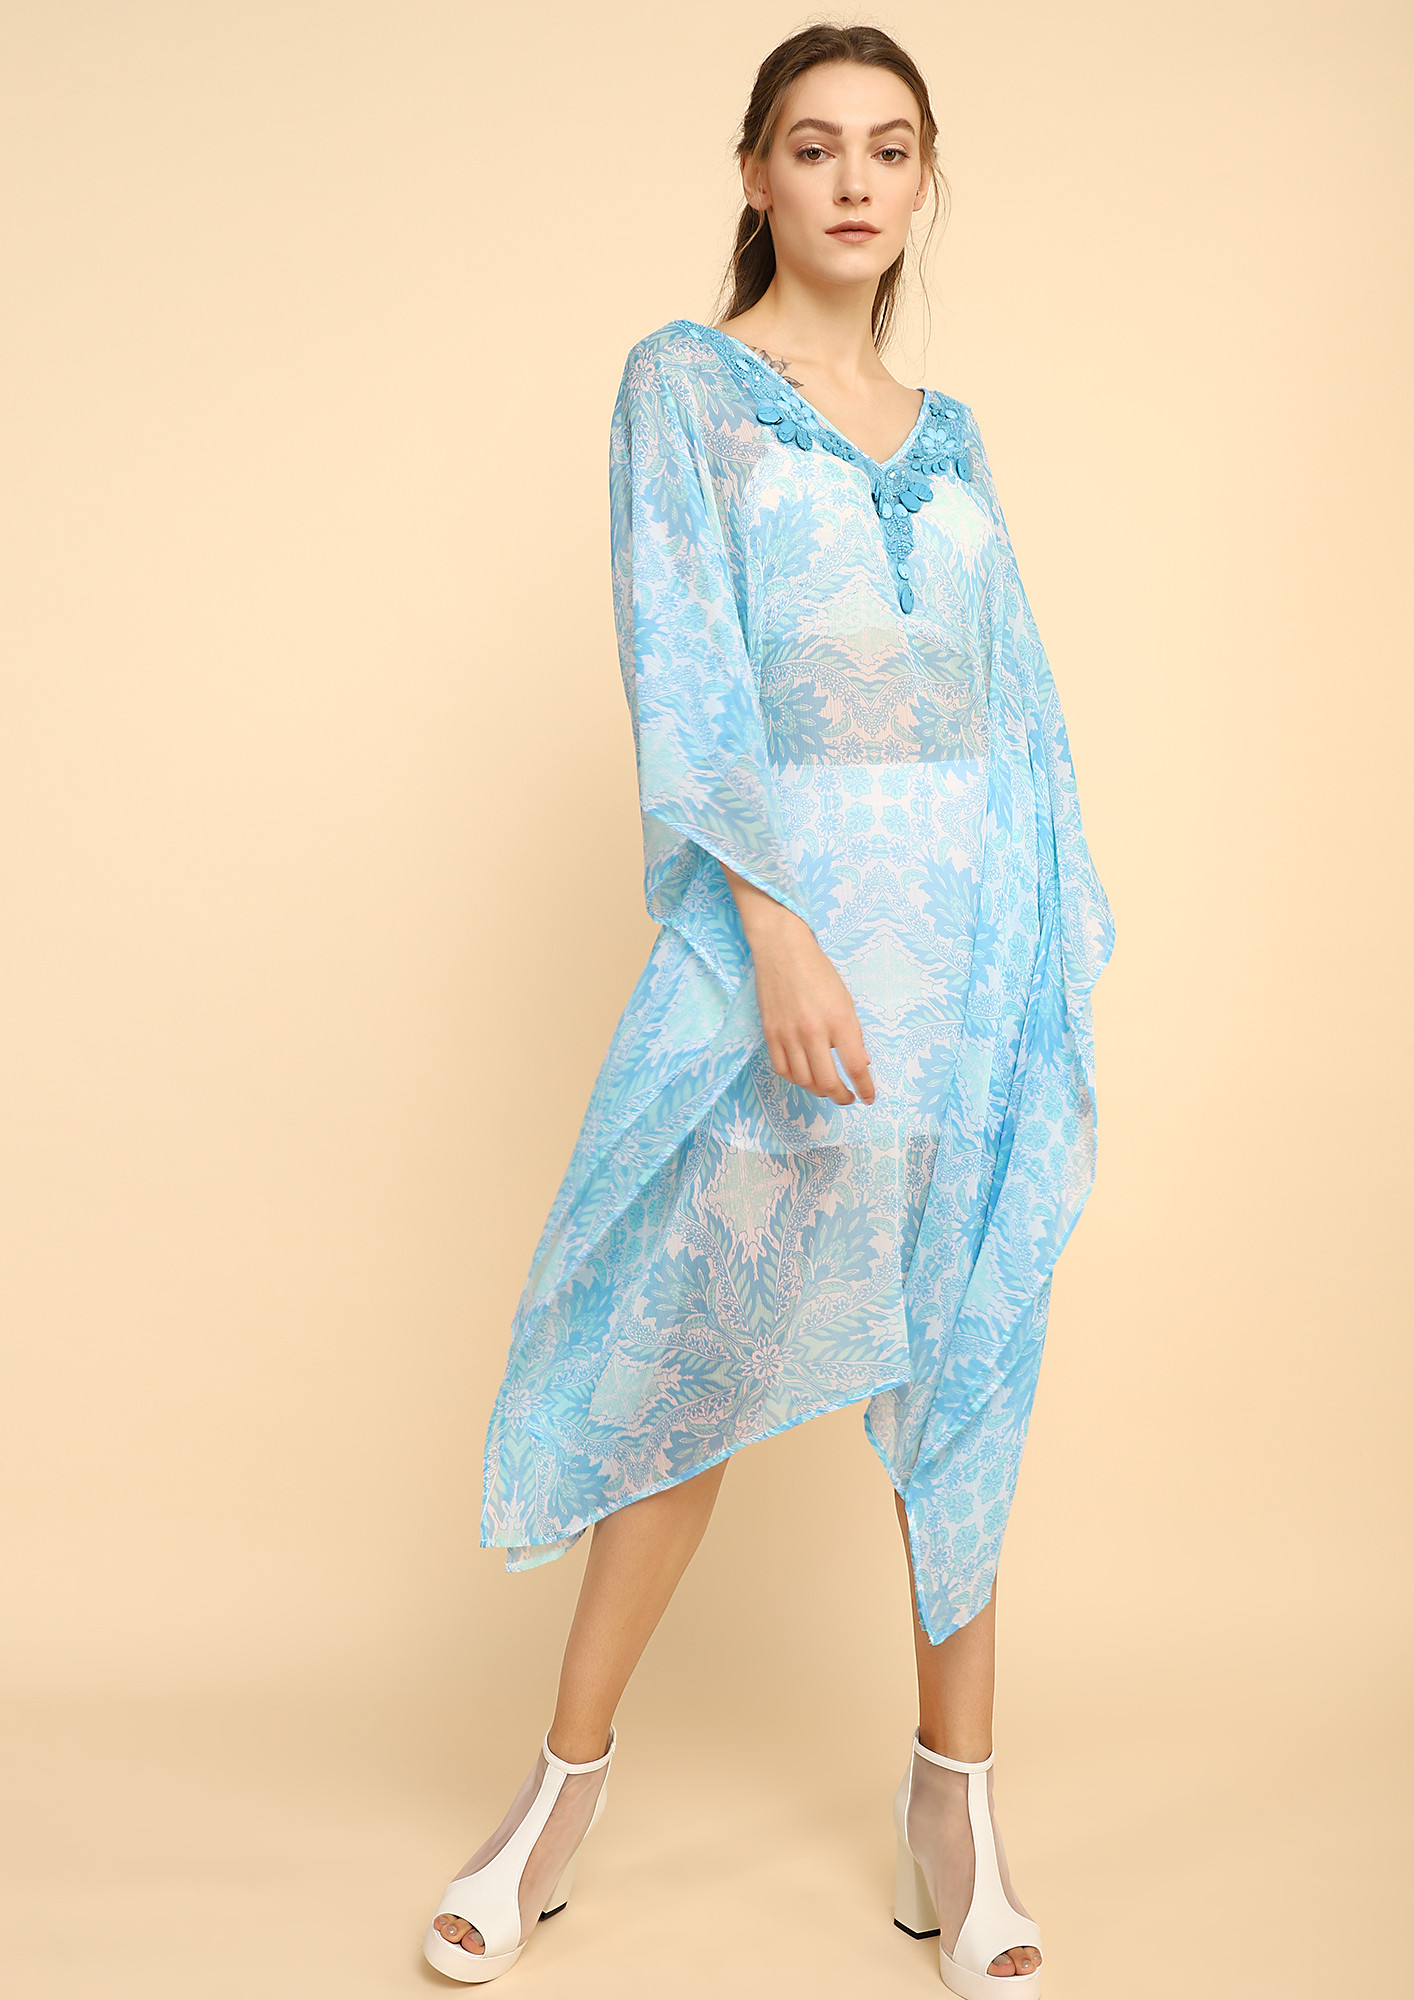 BREATHE IN THE OCEAN TURQUOISE BLUE COVER-UP 